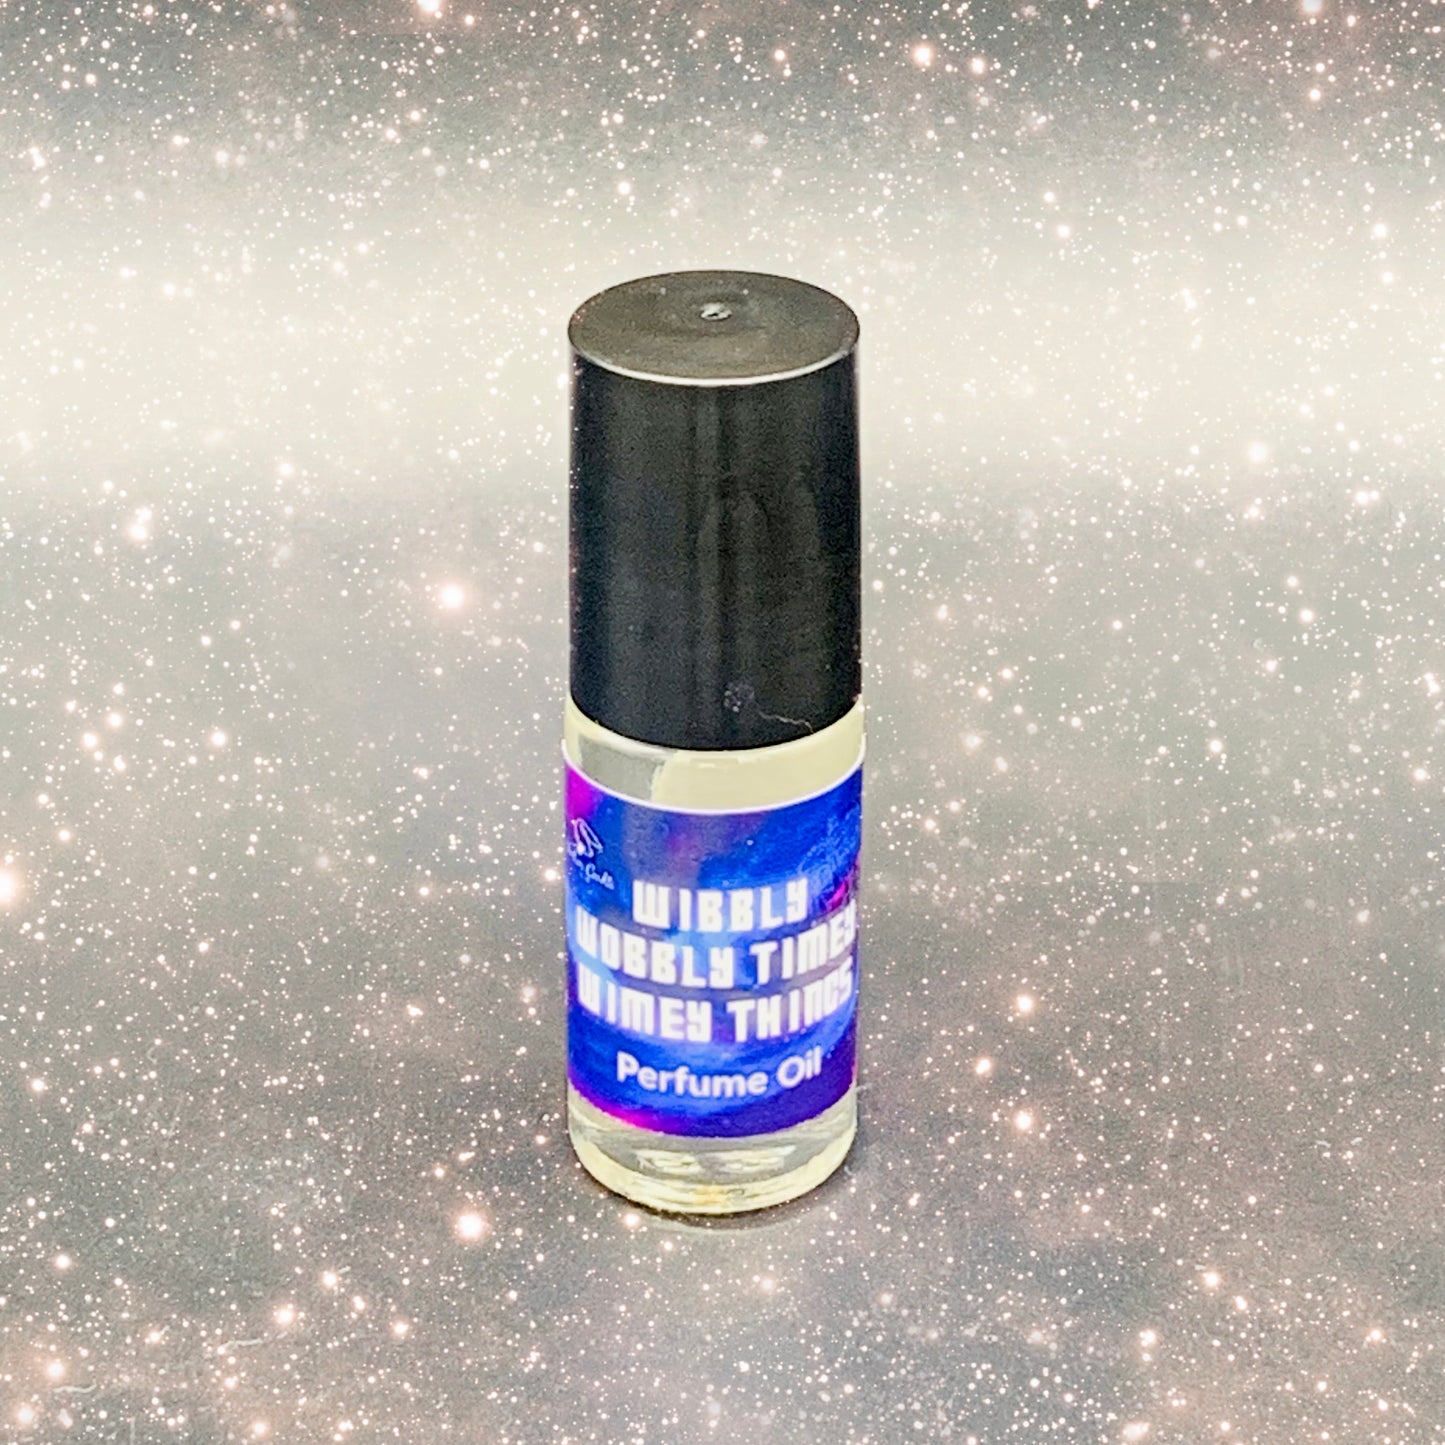 WIBBLY WOBBLY TIMEY WIMEY THINGS Perfume Oil